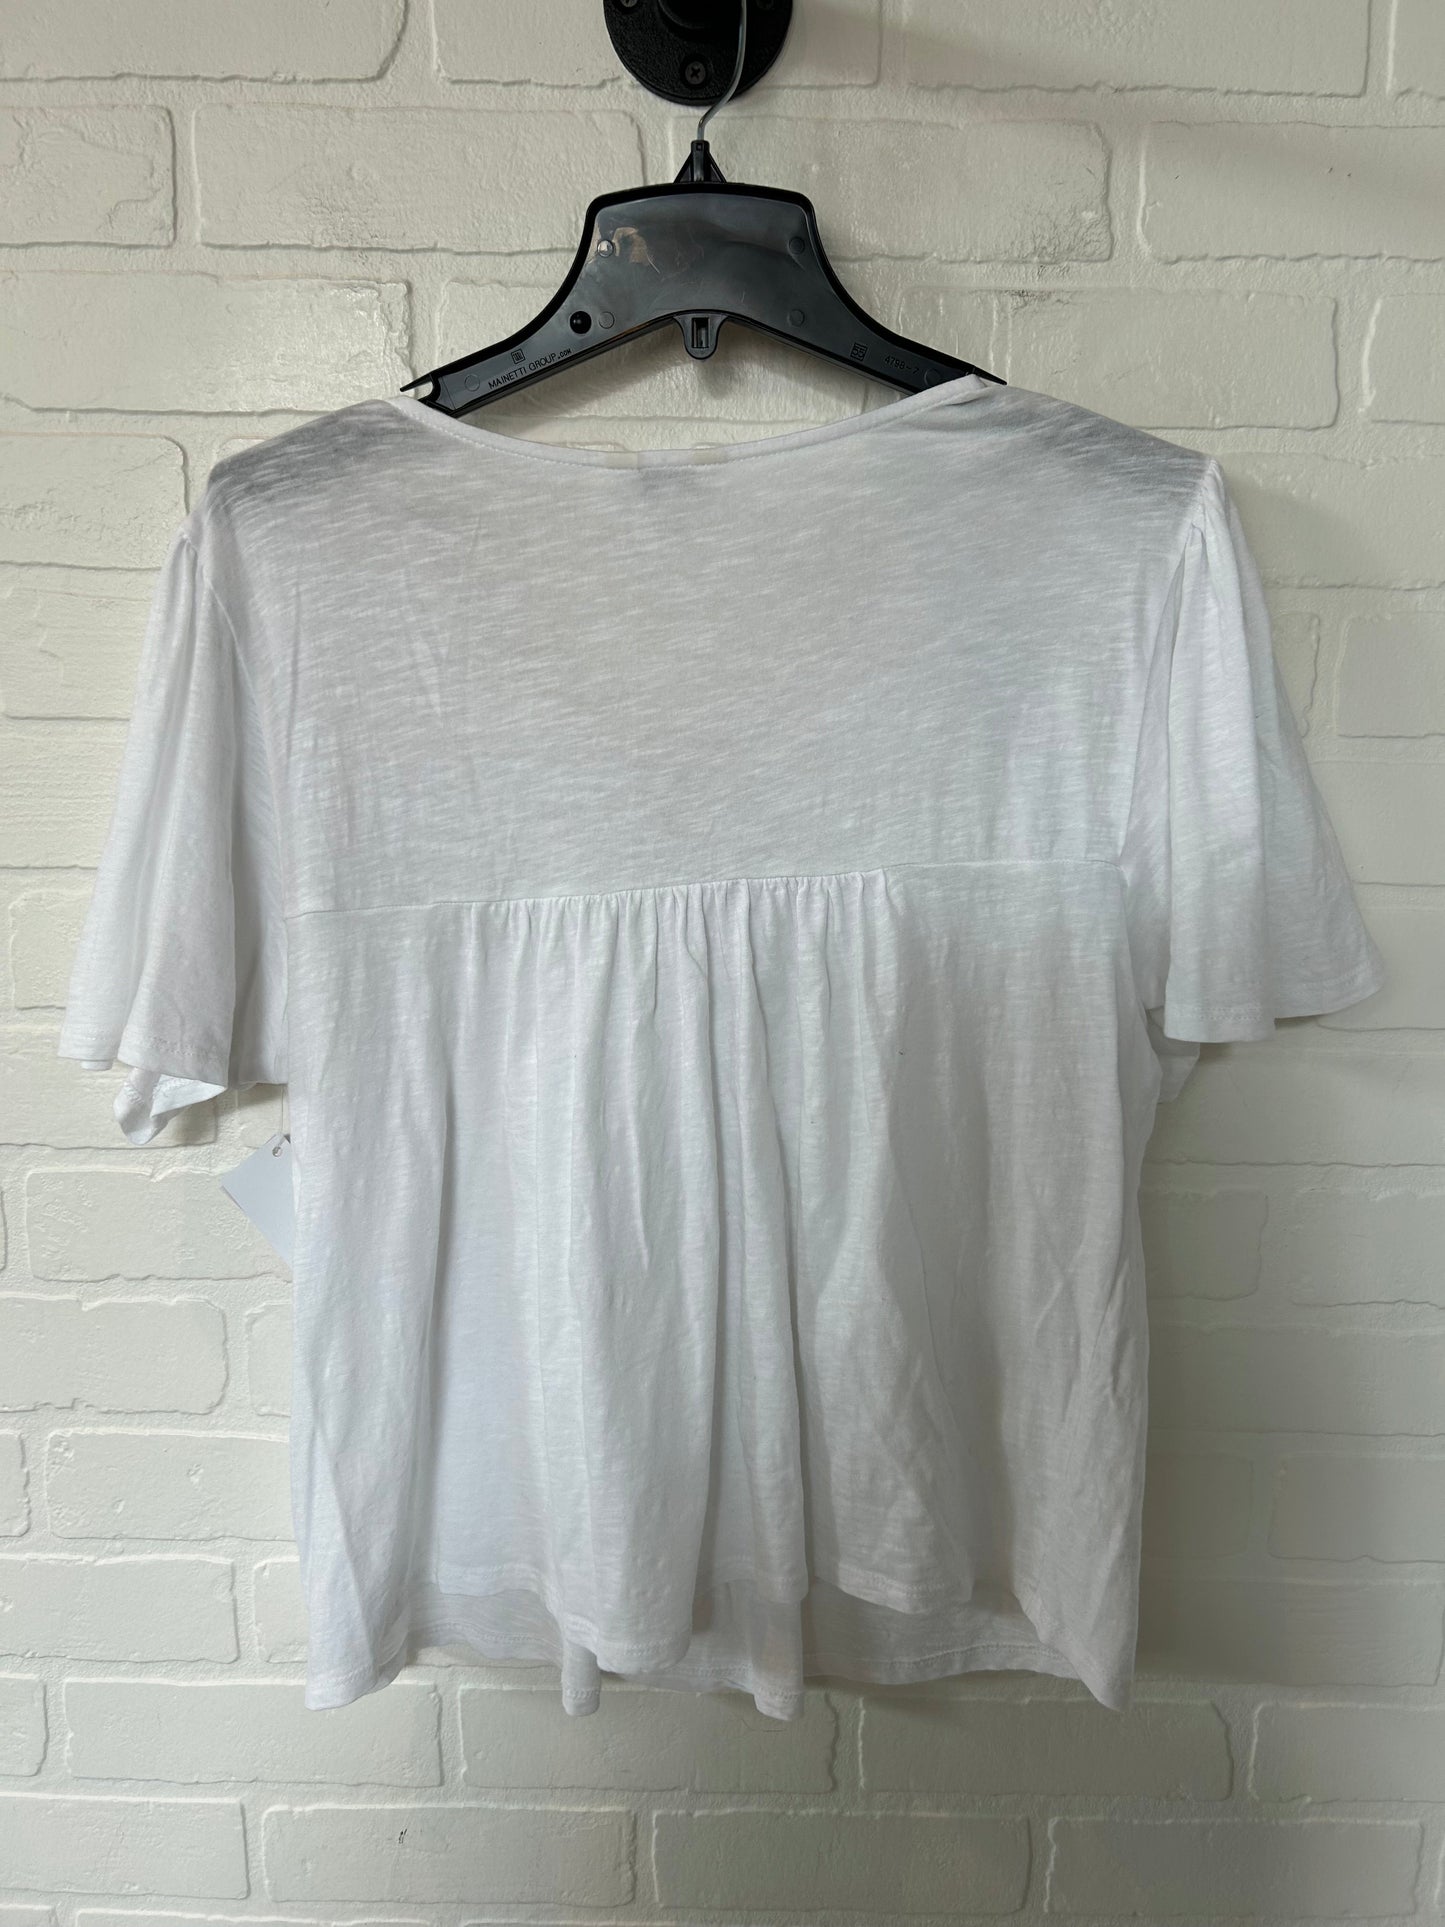 Tan & White Top Short Sleeve Lucky Brand, Size M